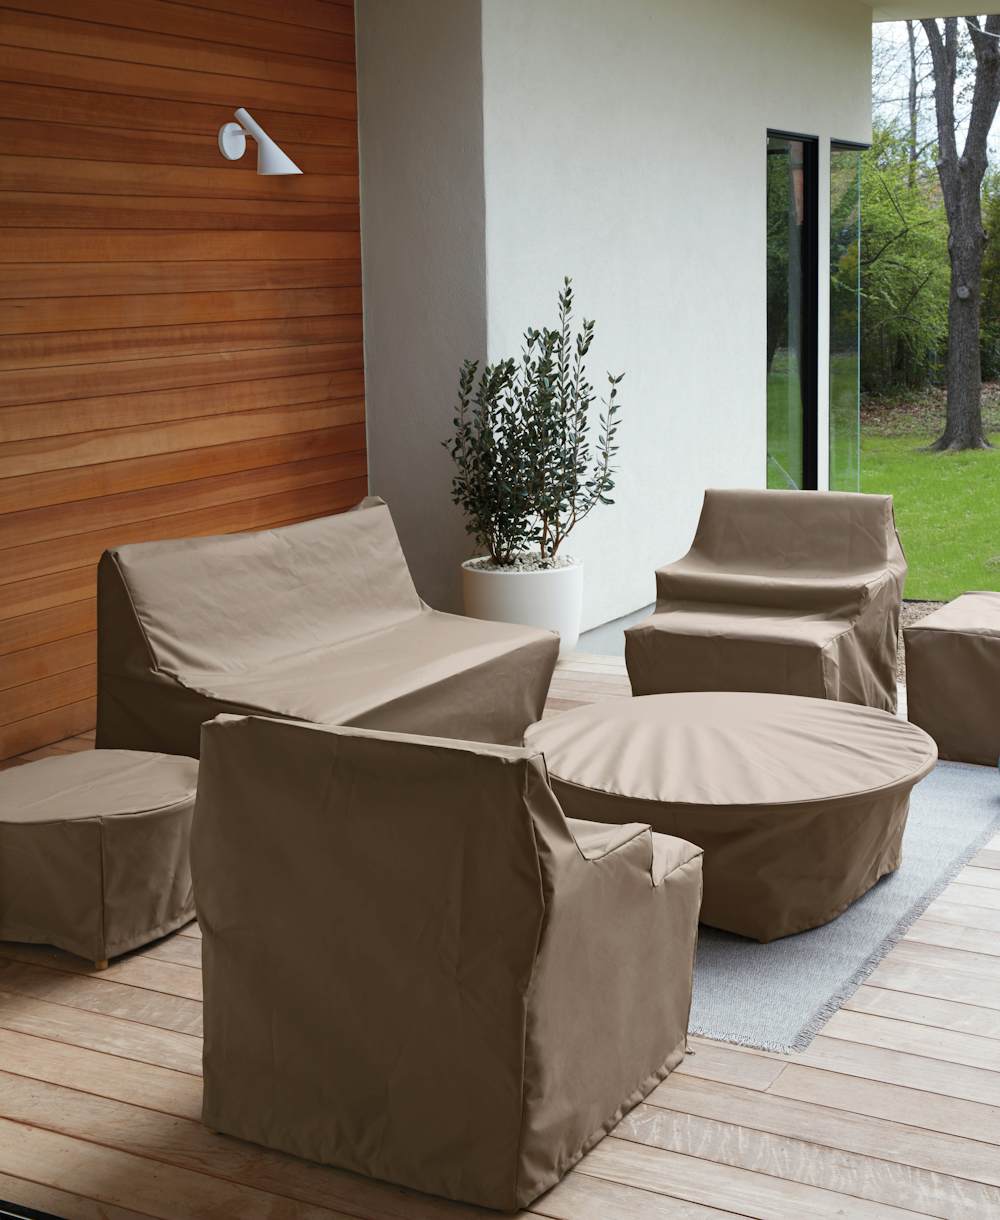 Eos Outdoor Furniture under Eos Table Covers in an outdoor patio setting